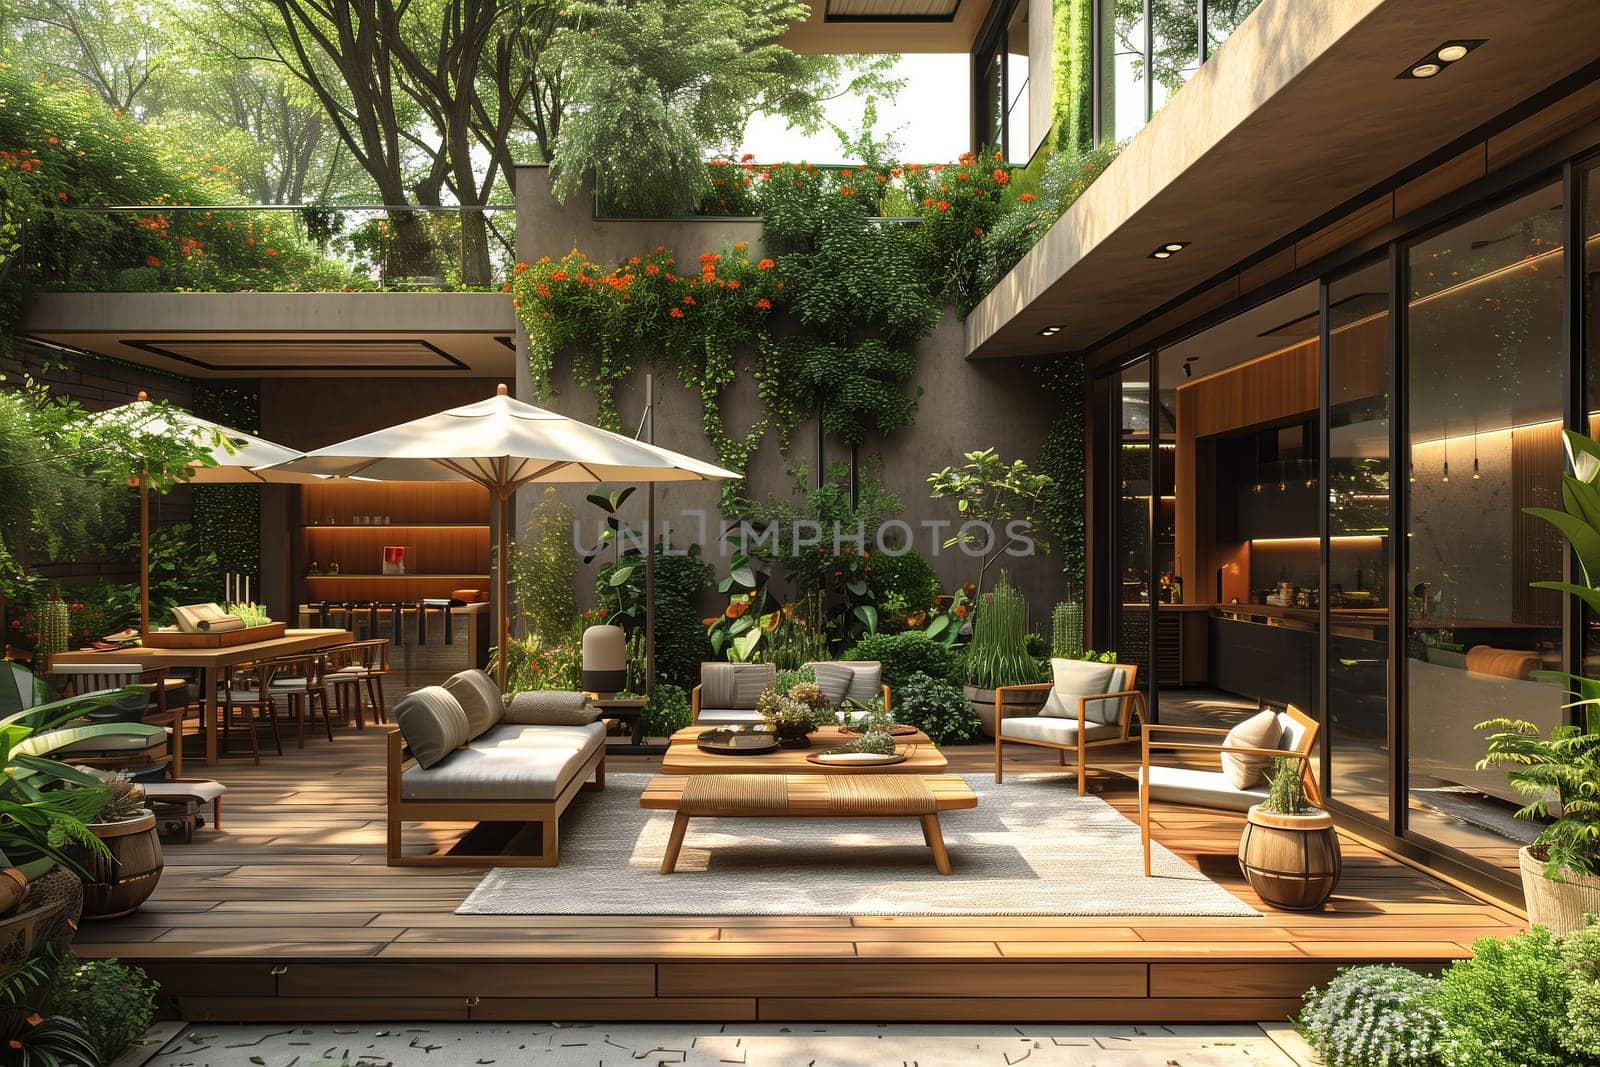 Lush patio with ample seating, umbrellas, plants, and trees in front of a house by richwolf